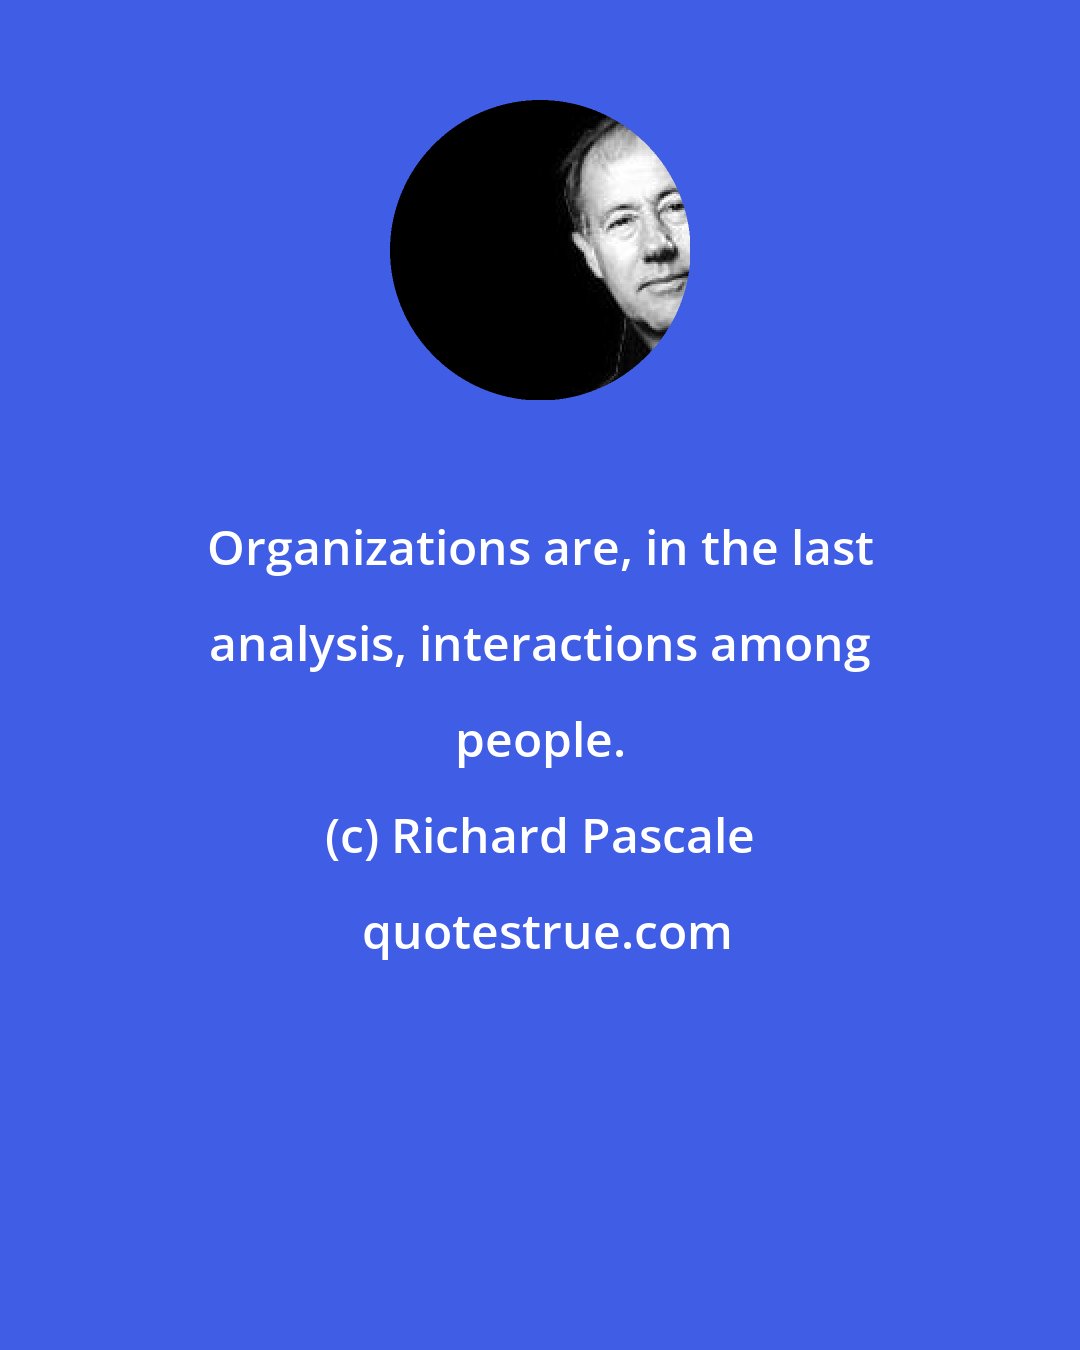 Richard Pascale: Organizations are, in the last analysis, interactions among people.